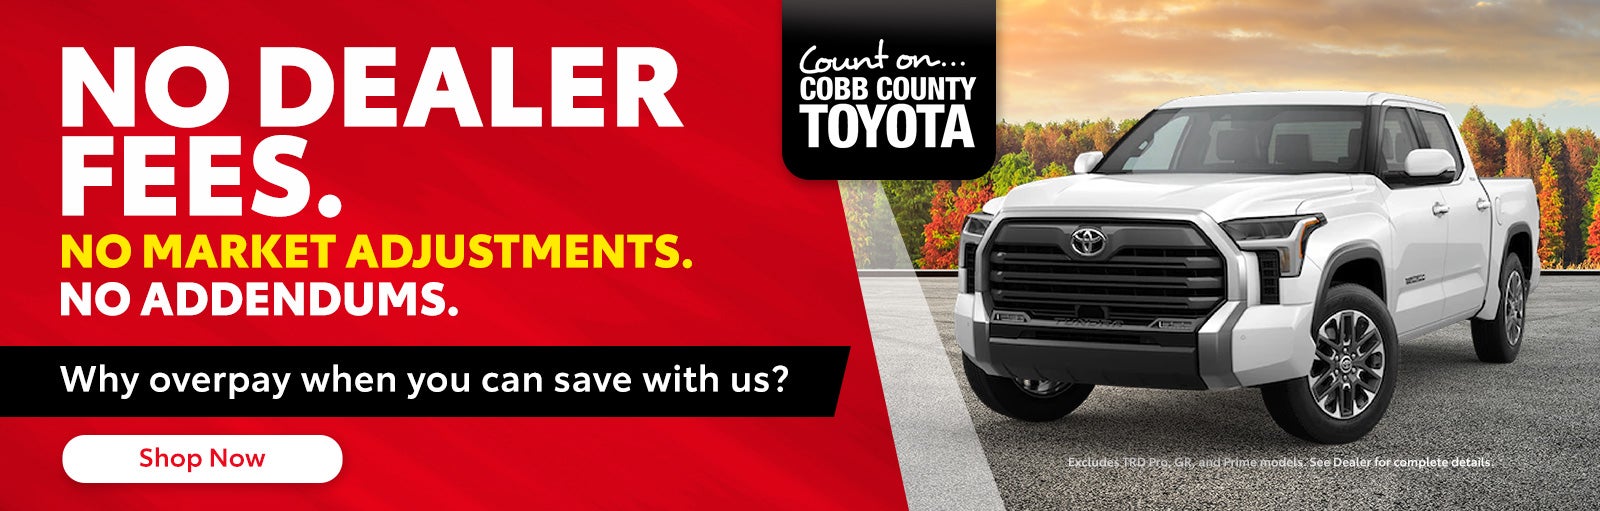 No Dealer Fees at Cobb County Toyota